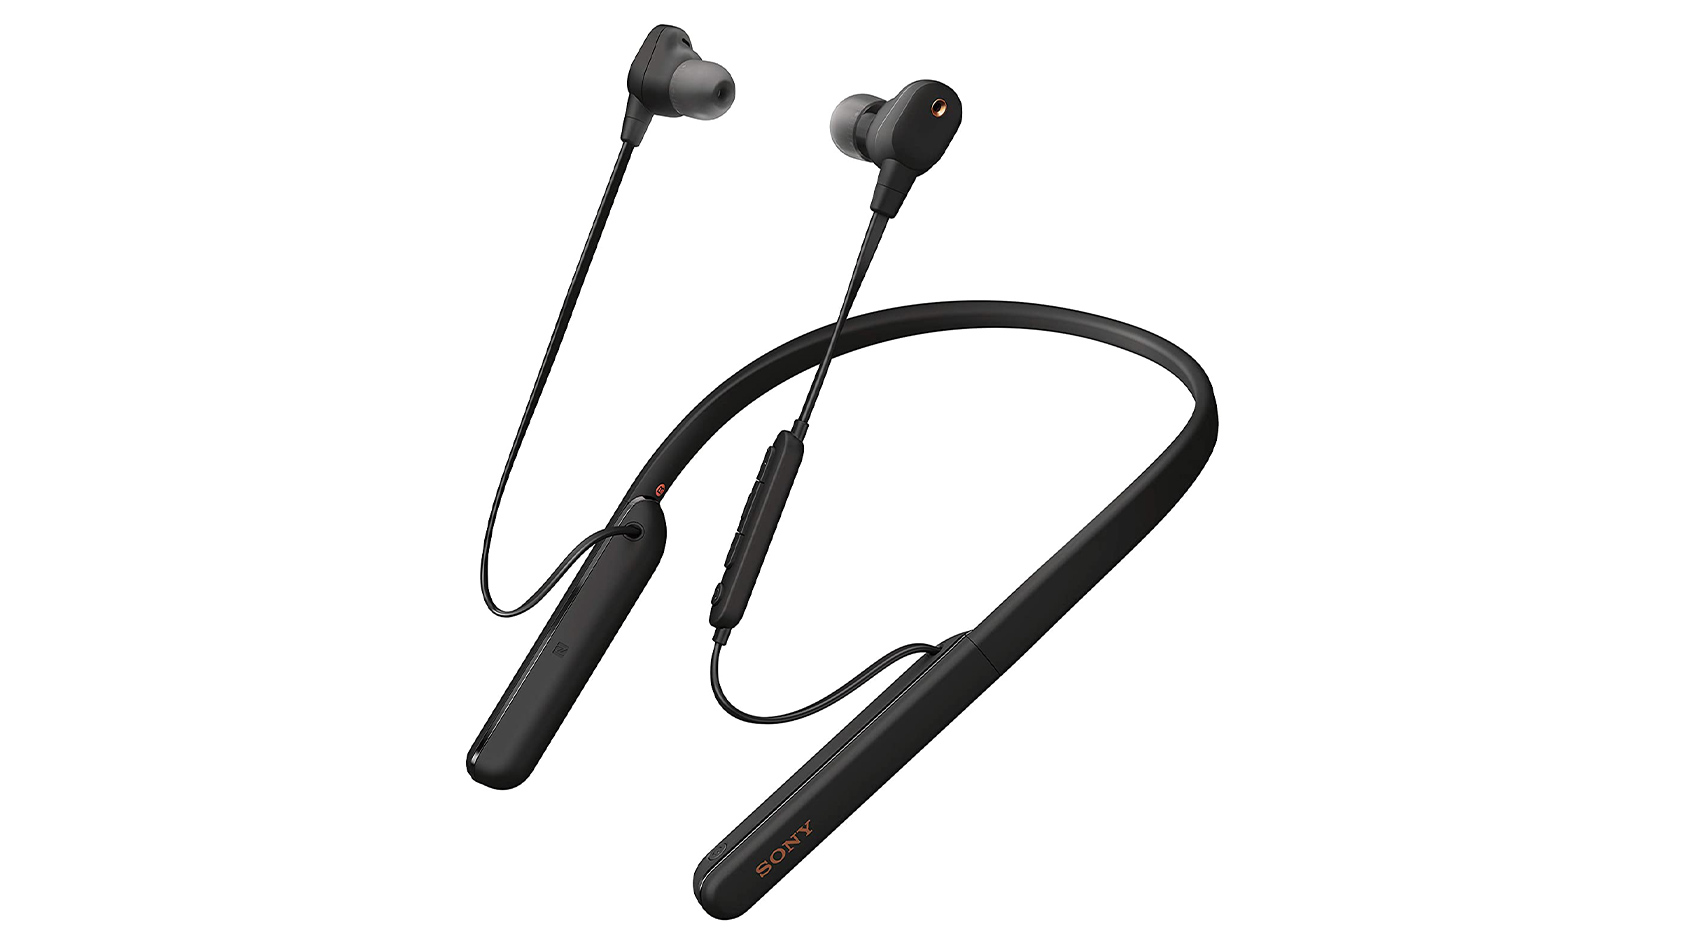 The Sony WI-1000XM2 noise canceling earbuds in black against a white background.